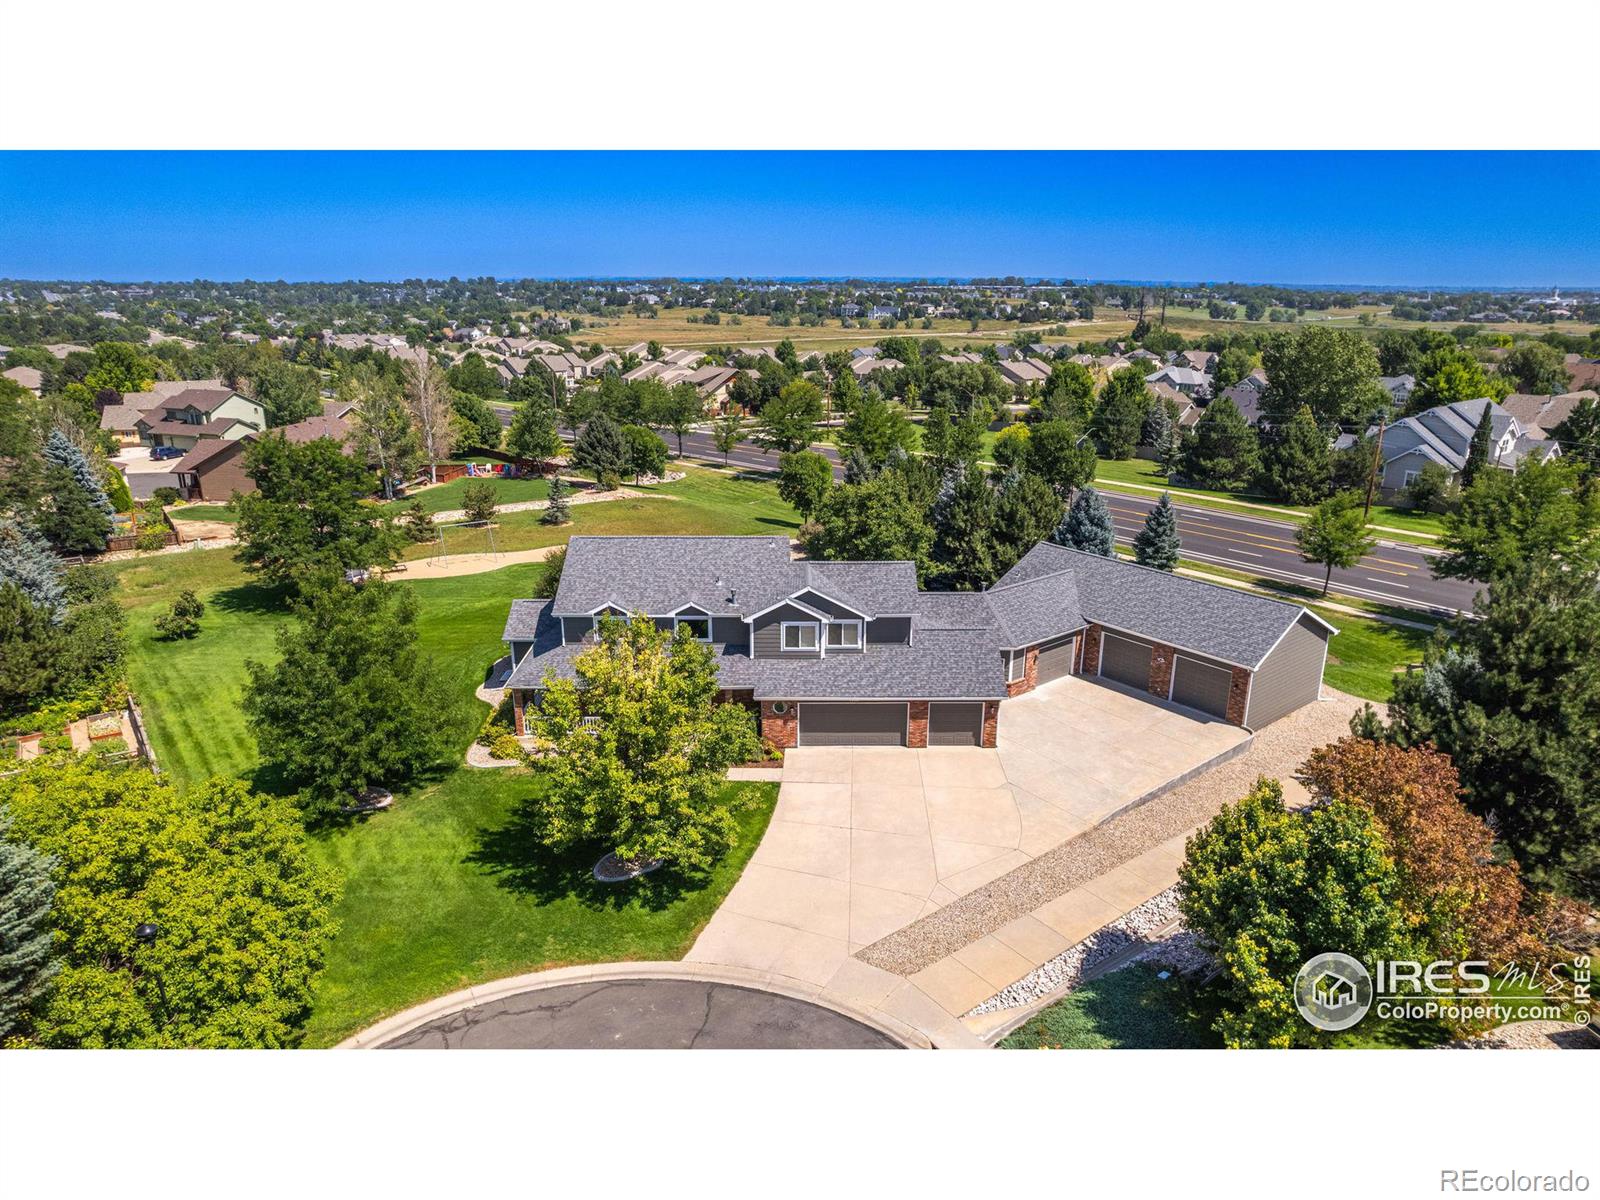 1006  somerly lane, Fort Collins sold home. Closed on 2024-02-08 for $1,050,000.